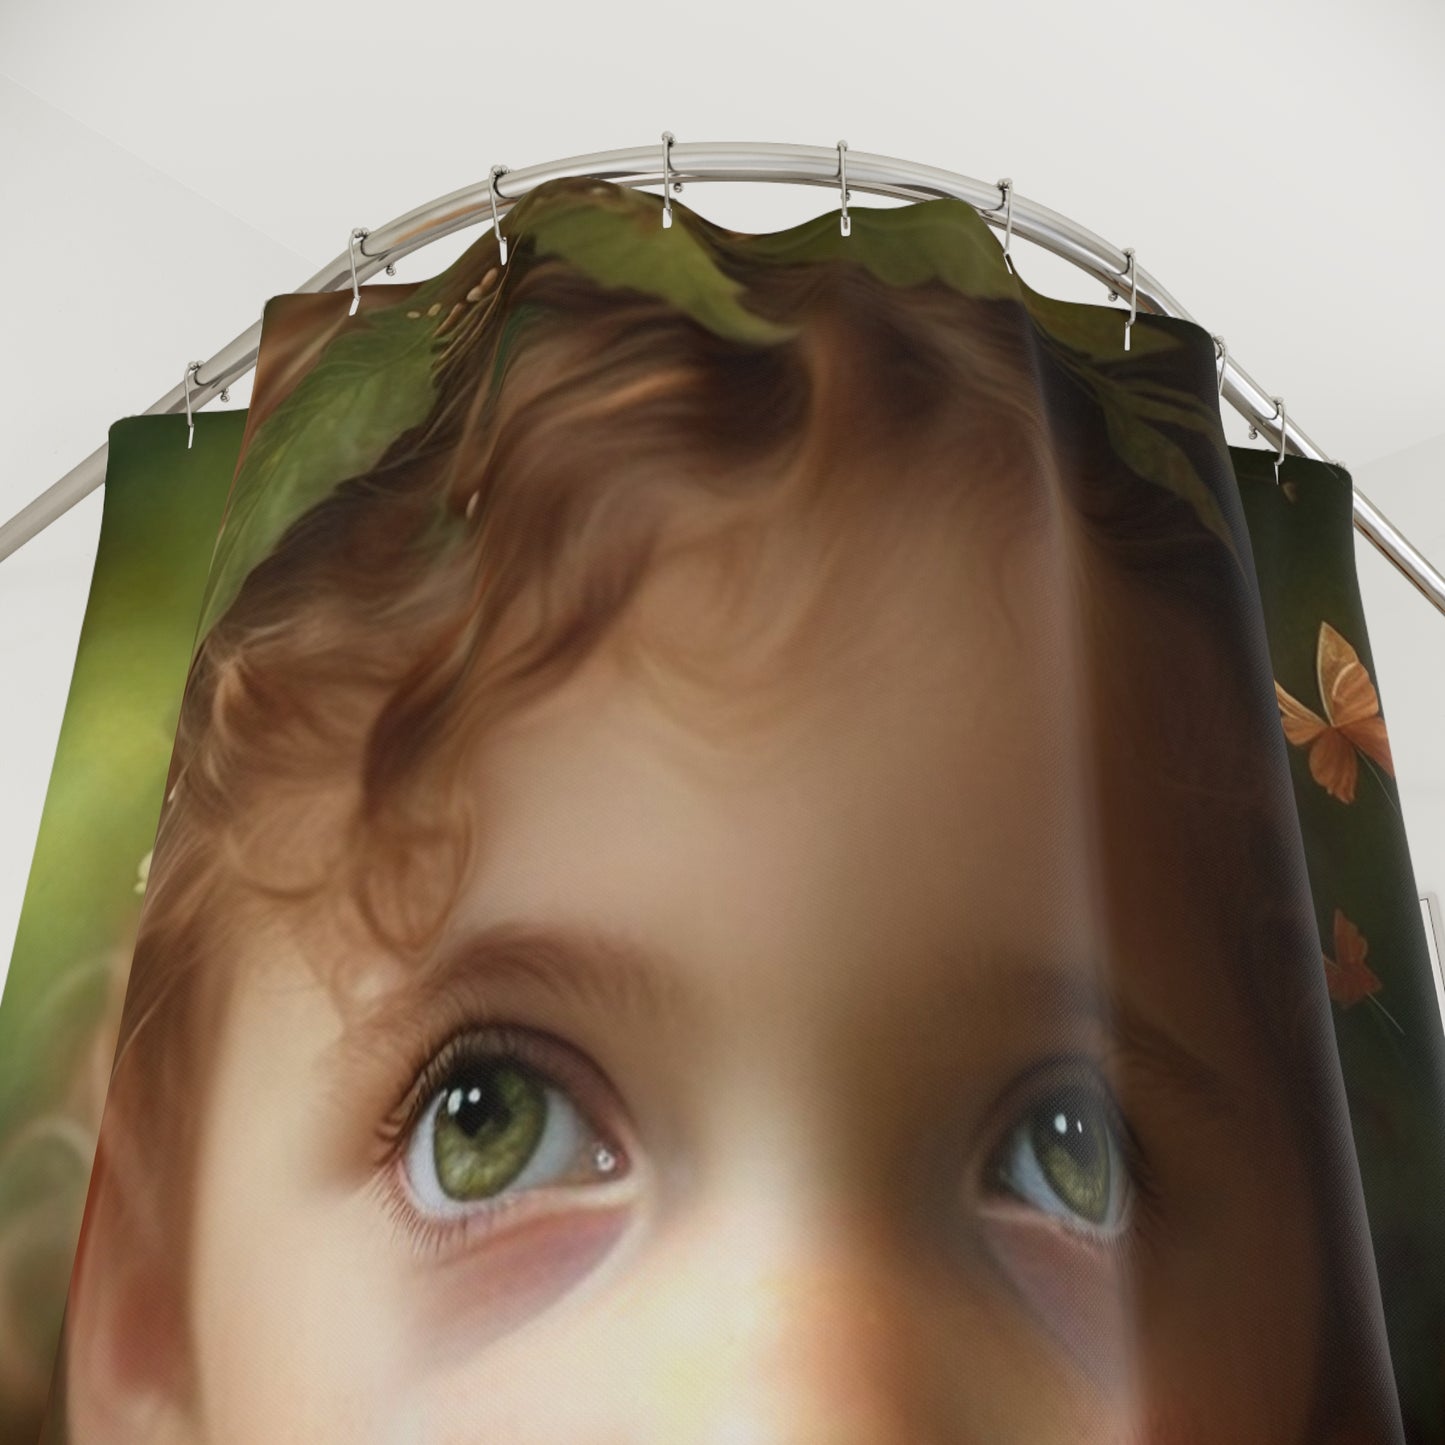 Polyester Shower Curtain fairy 3 year old